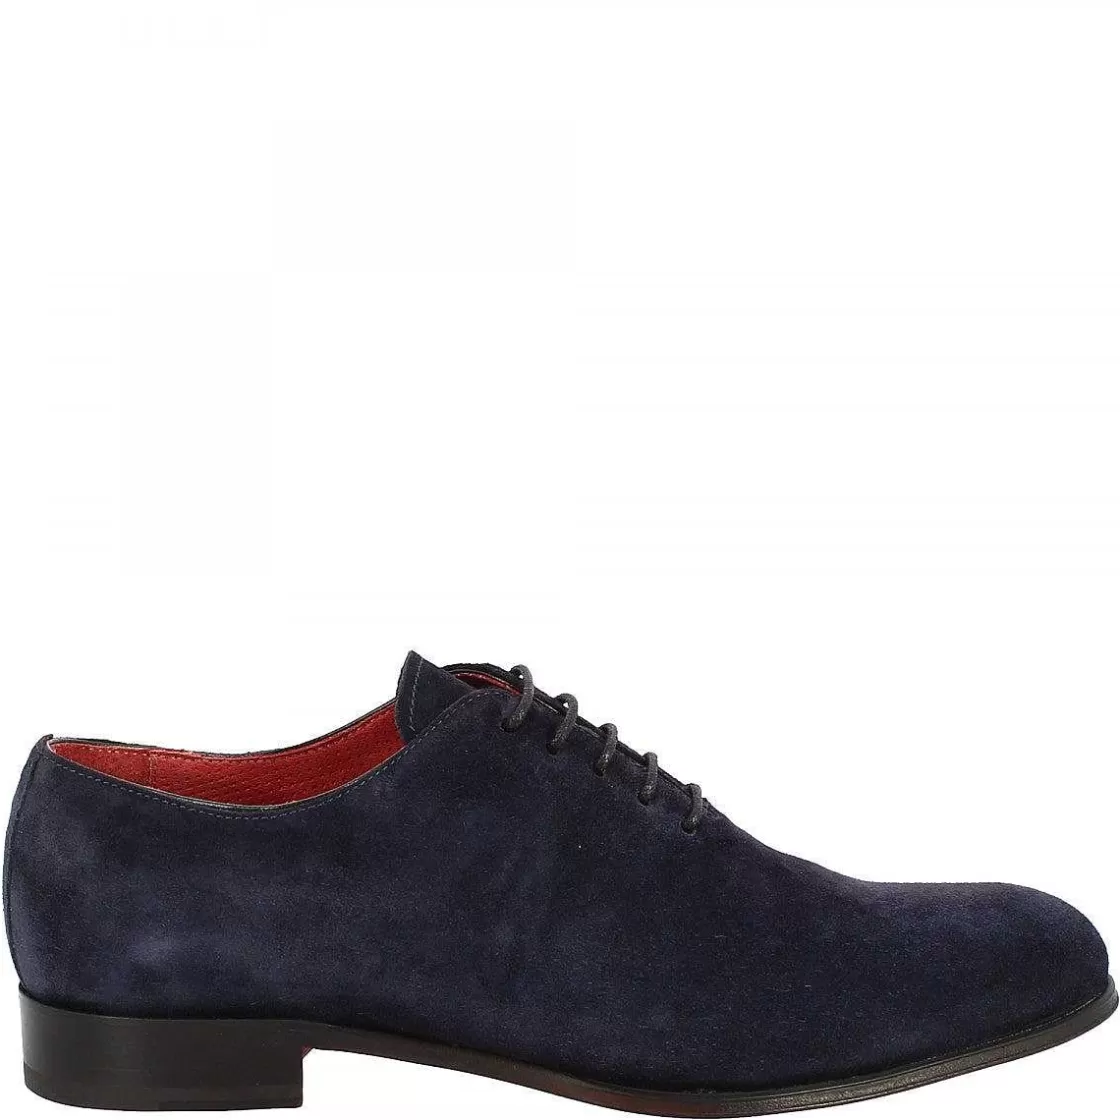 Leonardo Men'S Handmade Lace-Up Shoes In Blue Suede Leather Sale